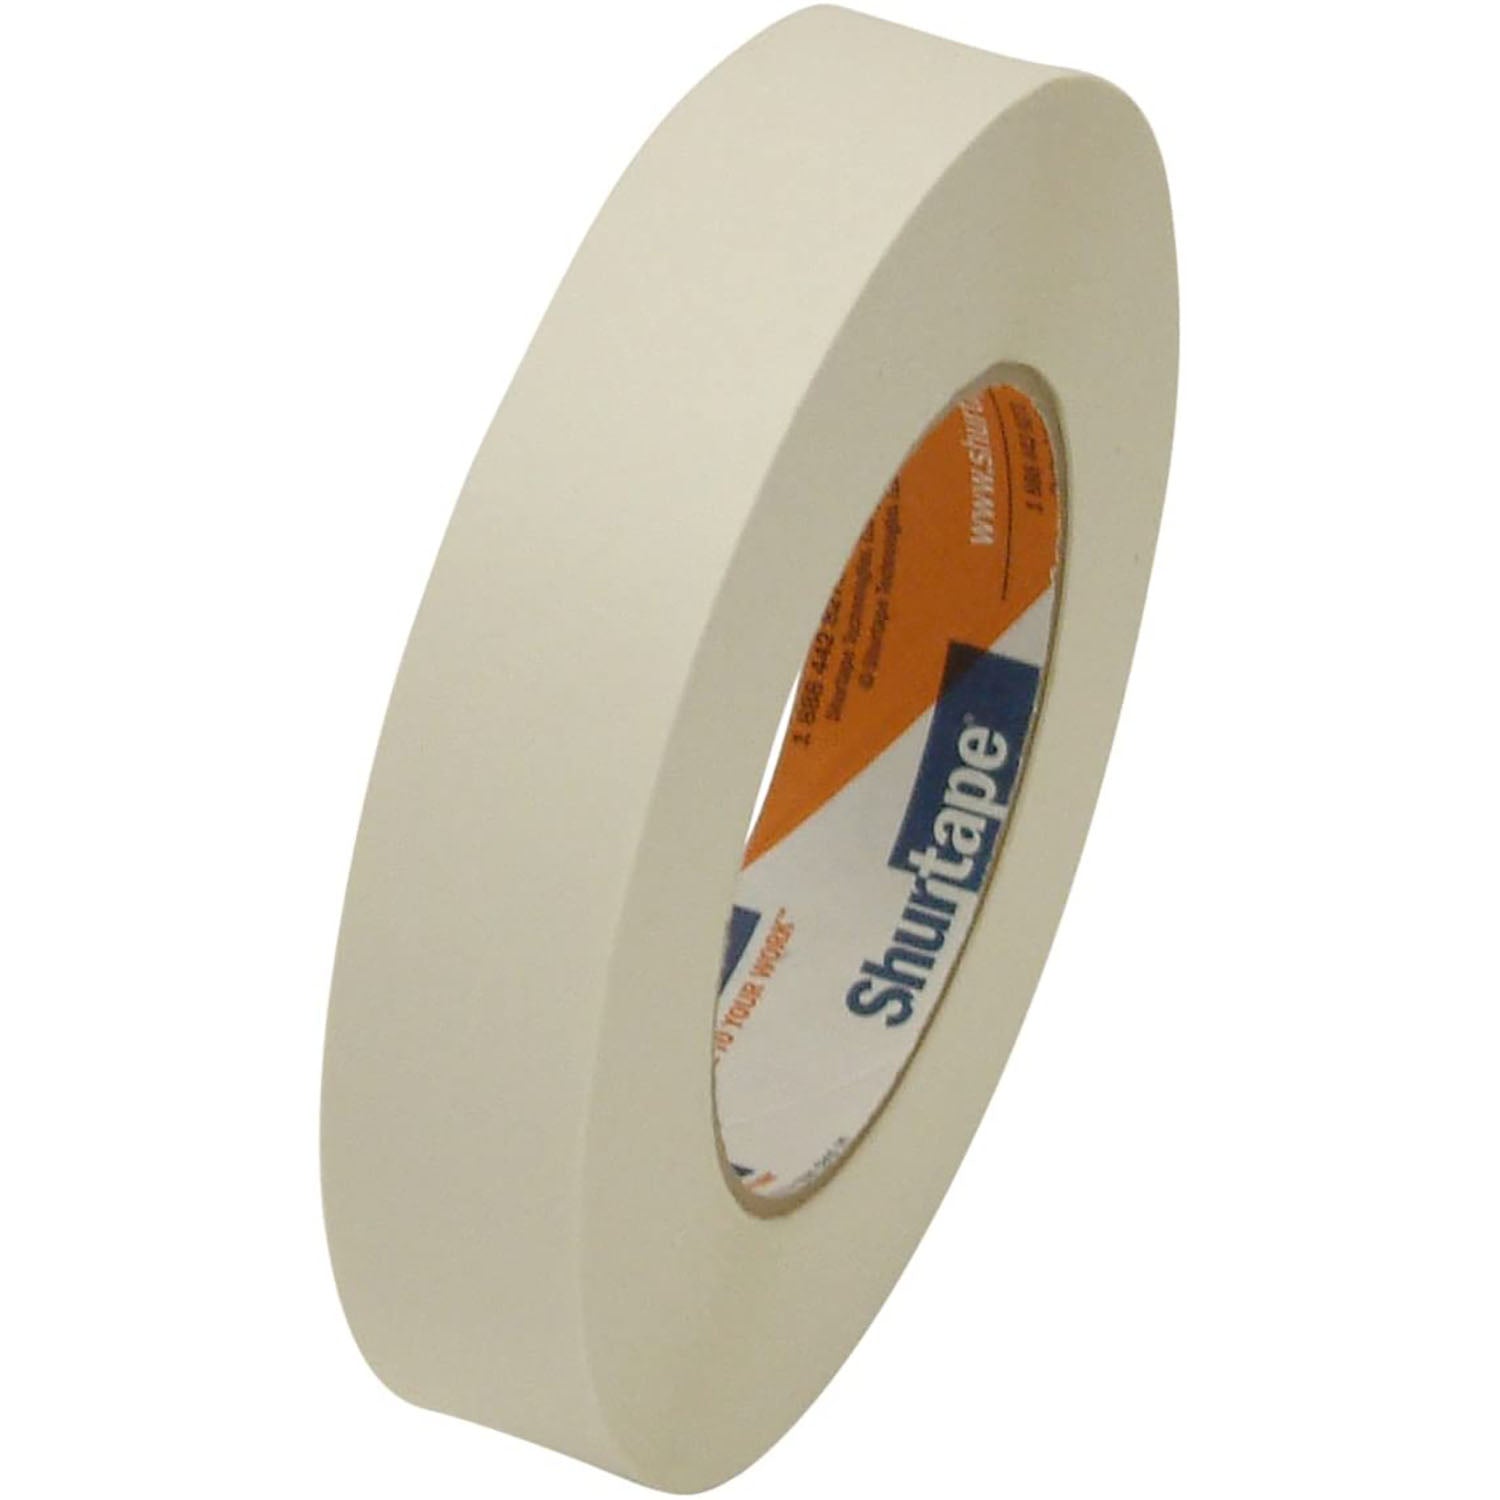 Shurtape PW-100 Corrosion Protection Pipe Wrap Tape